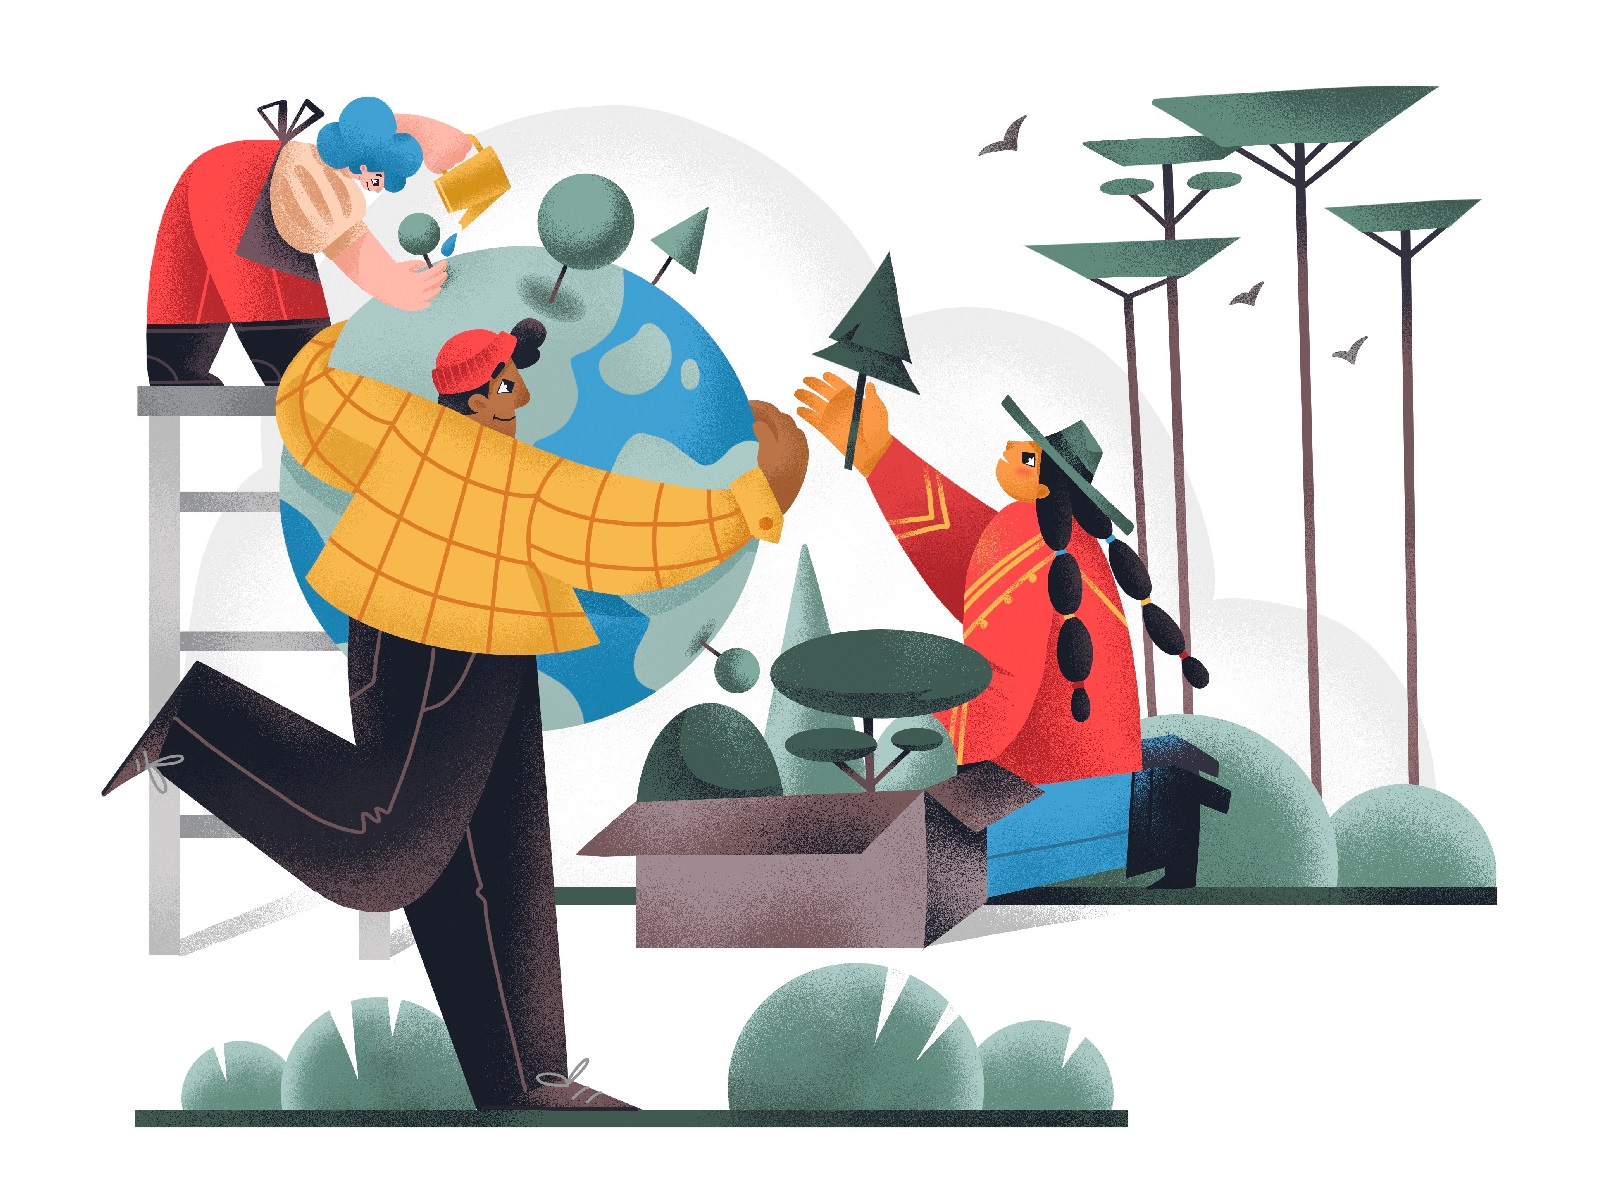 Earth Day: Illustrations About Taking Care of Our Planet